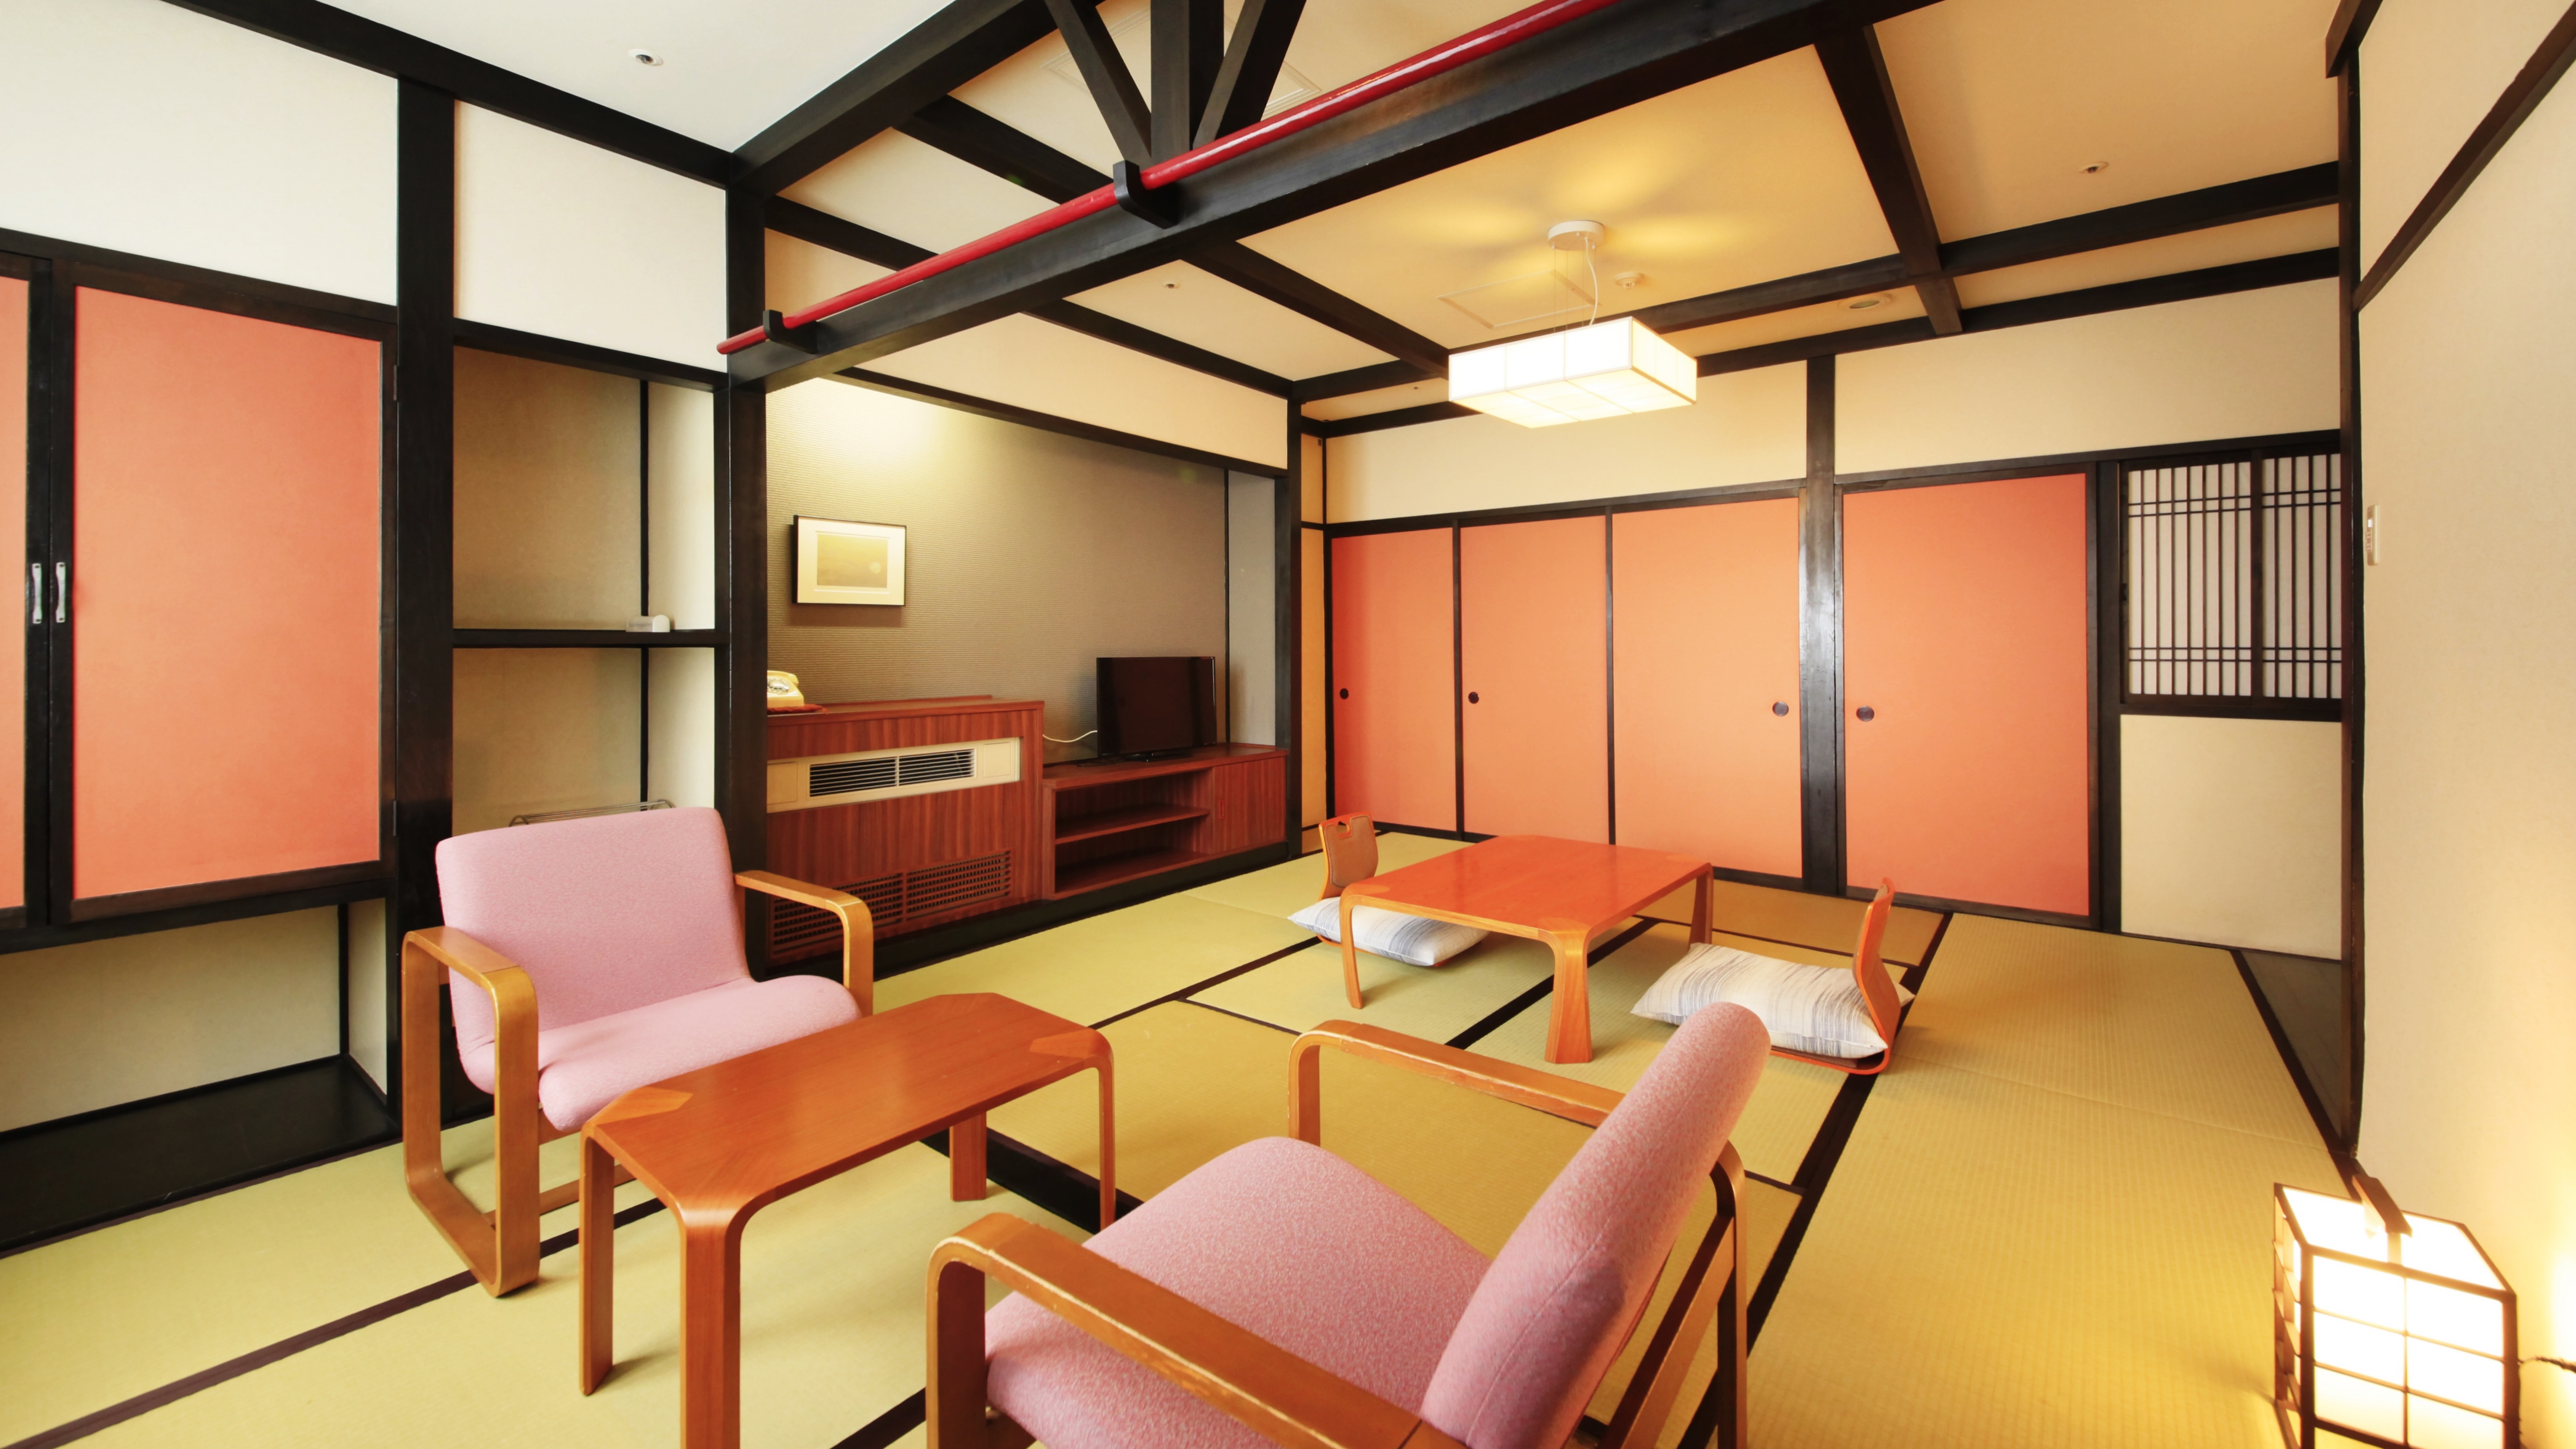 [An example of a retro-style Japanese-style room with 8 tatami mats]